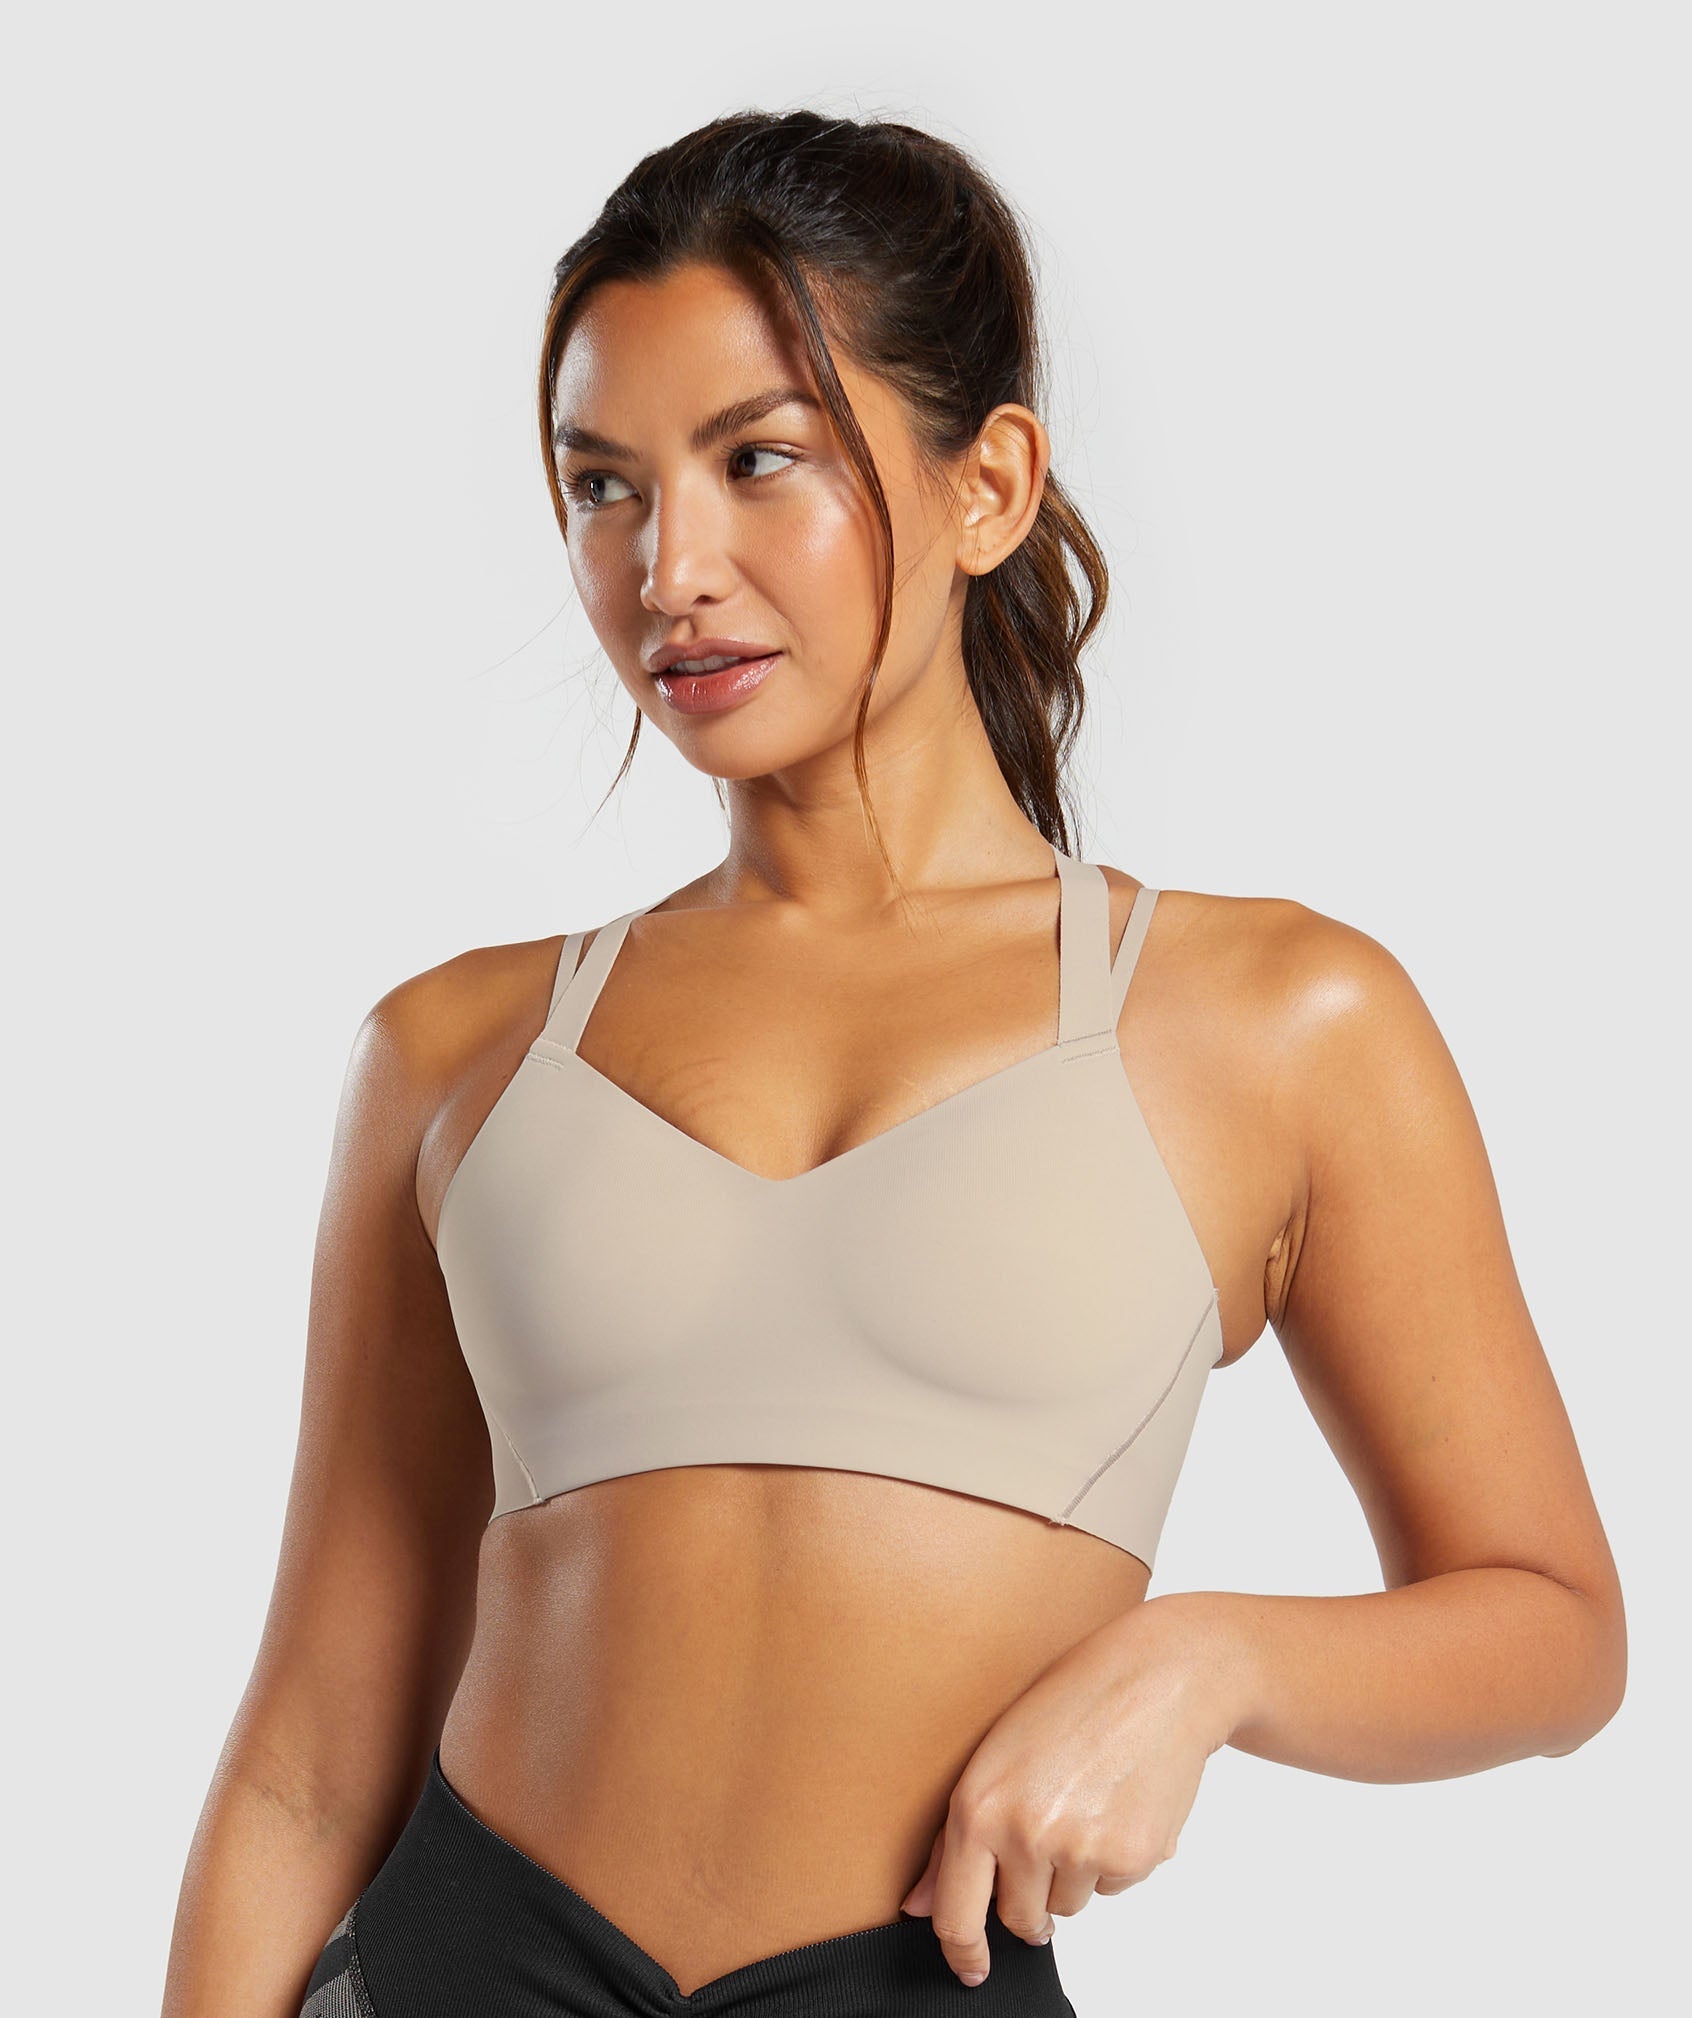 Gymshark Apex Limit Seamless Ruched Sports Bra - Black/Washed